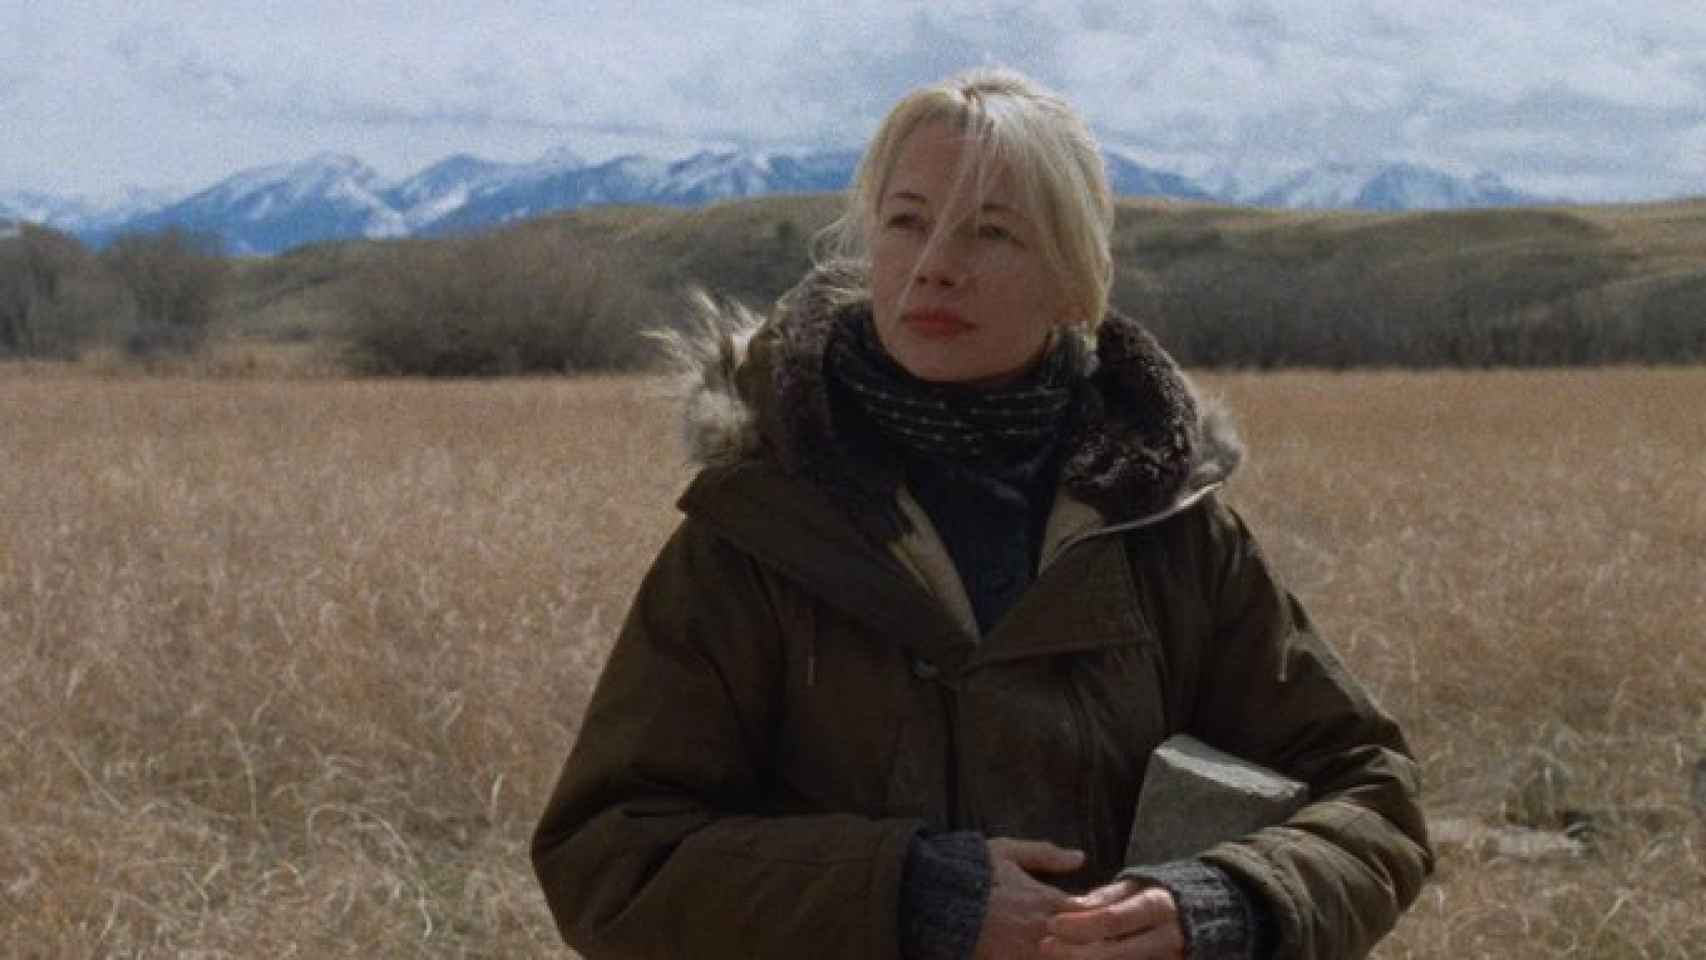 Showing Up (Kelly Reichardt)